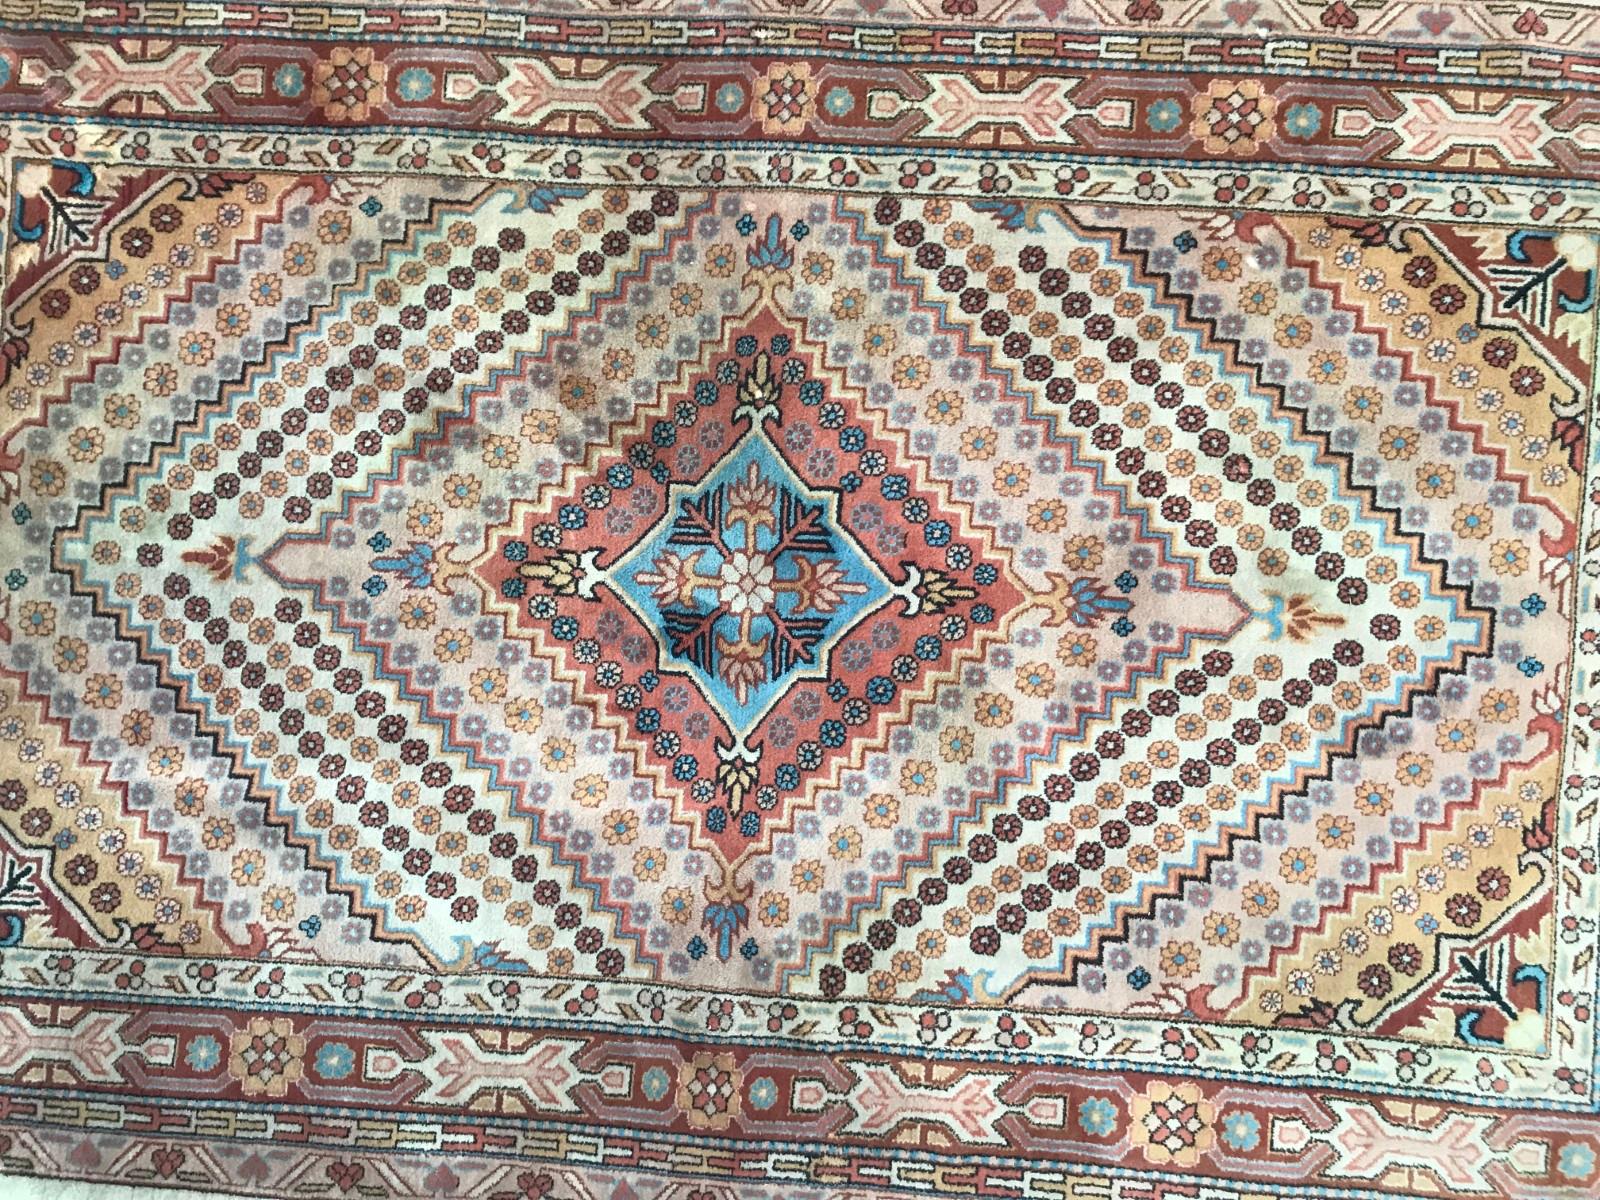 Nice Sinkiang rug late 20th century with beautiful geometrical design and light colors with beige, blue, pink, green, entirely hand knotted with wool velvet on cotton foundations.

✨✨✨
